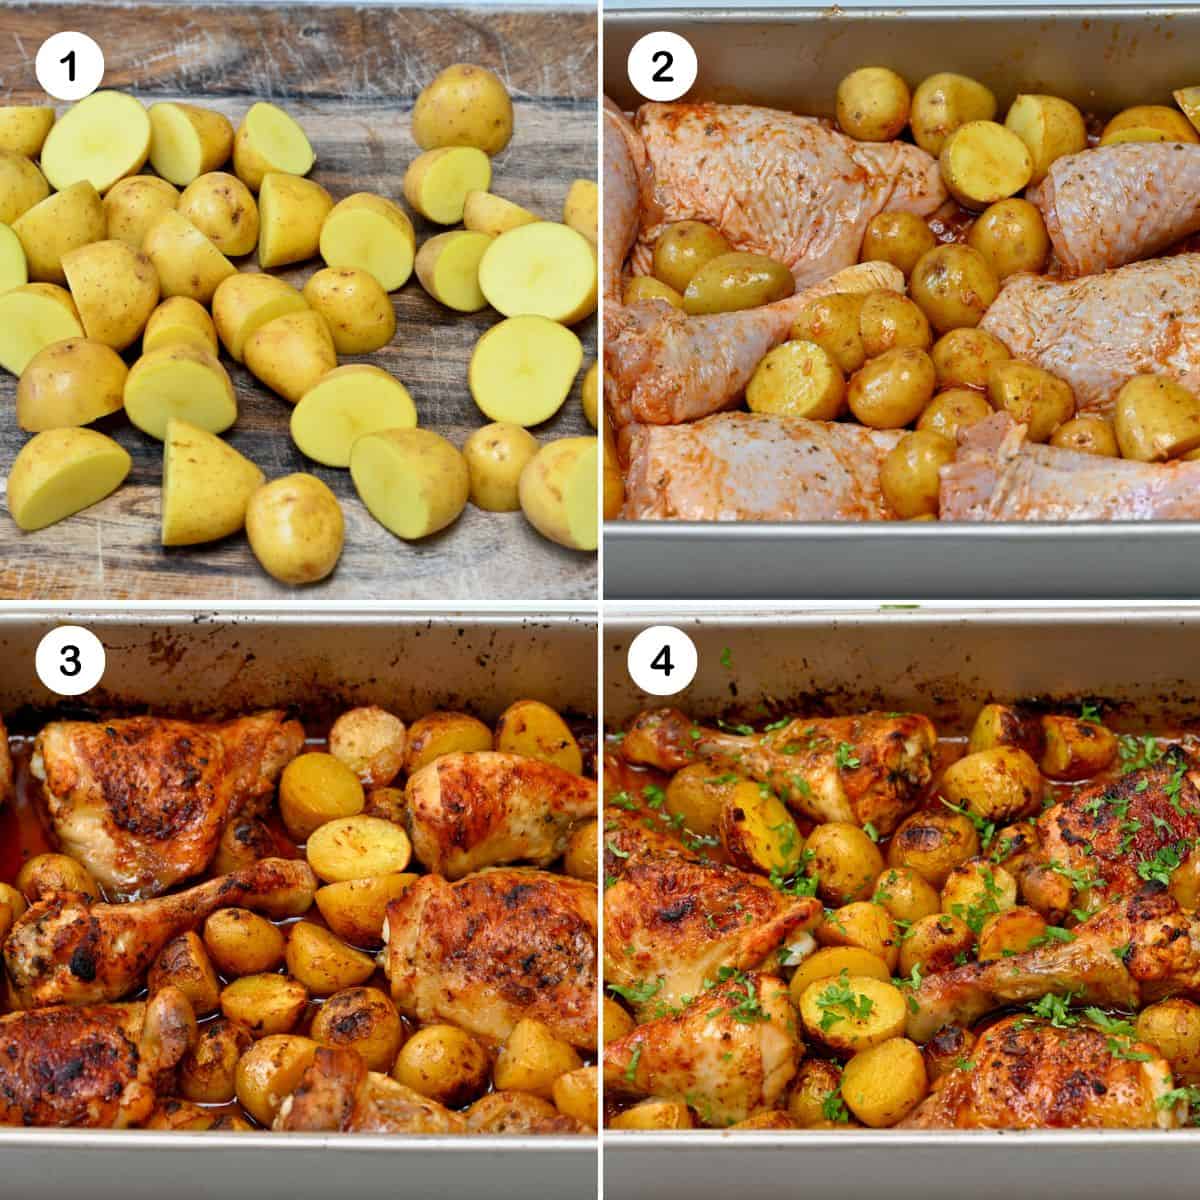 Steps for making chicken and potatoes